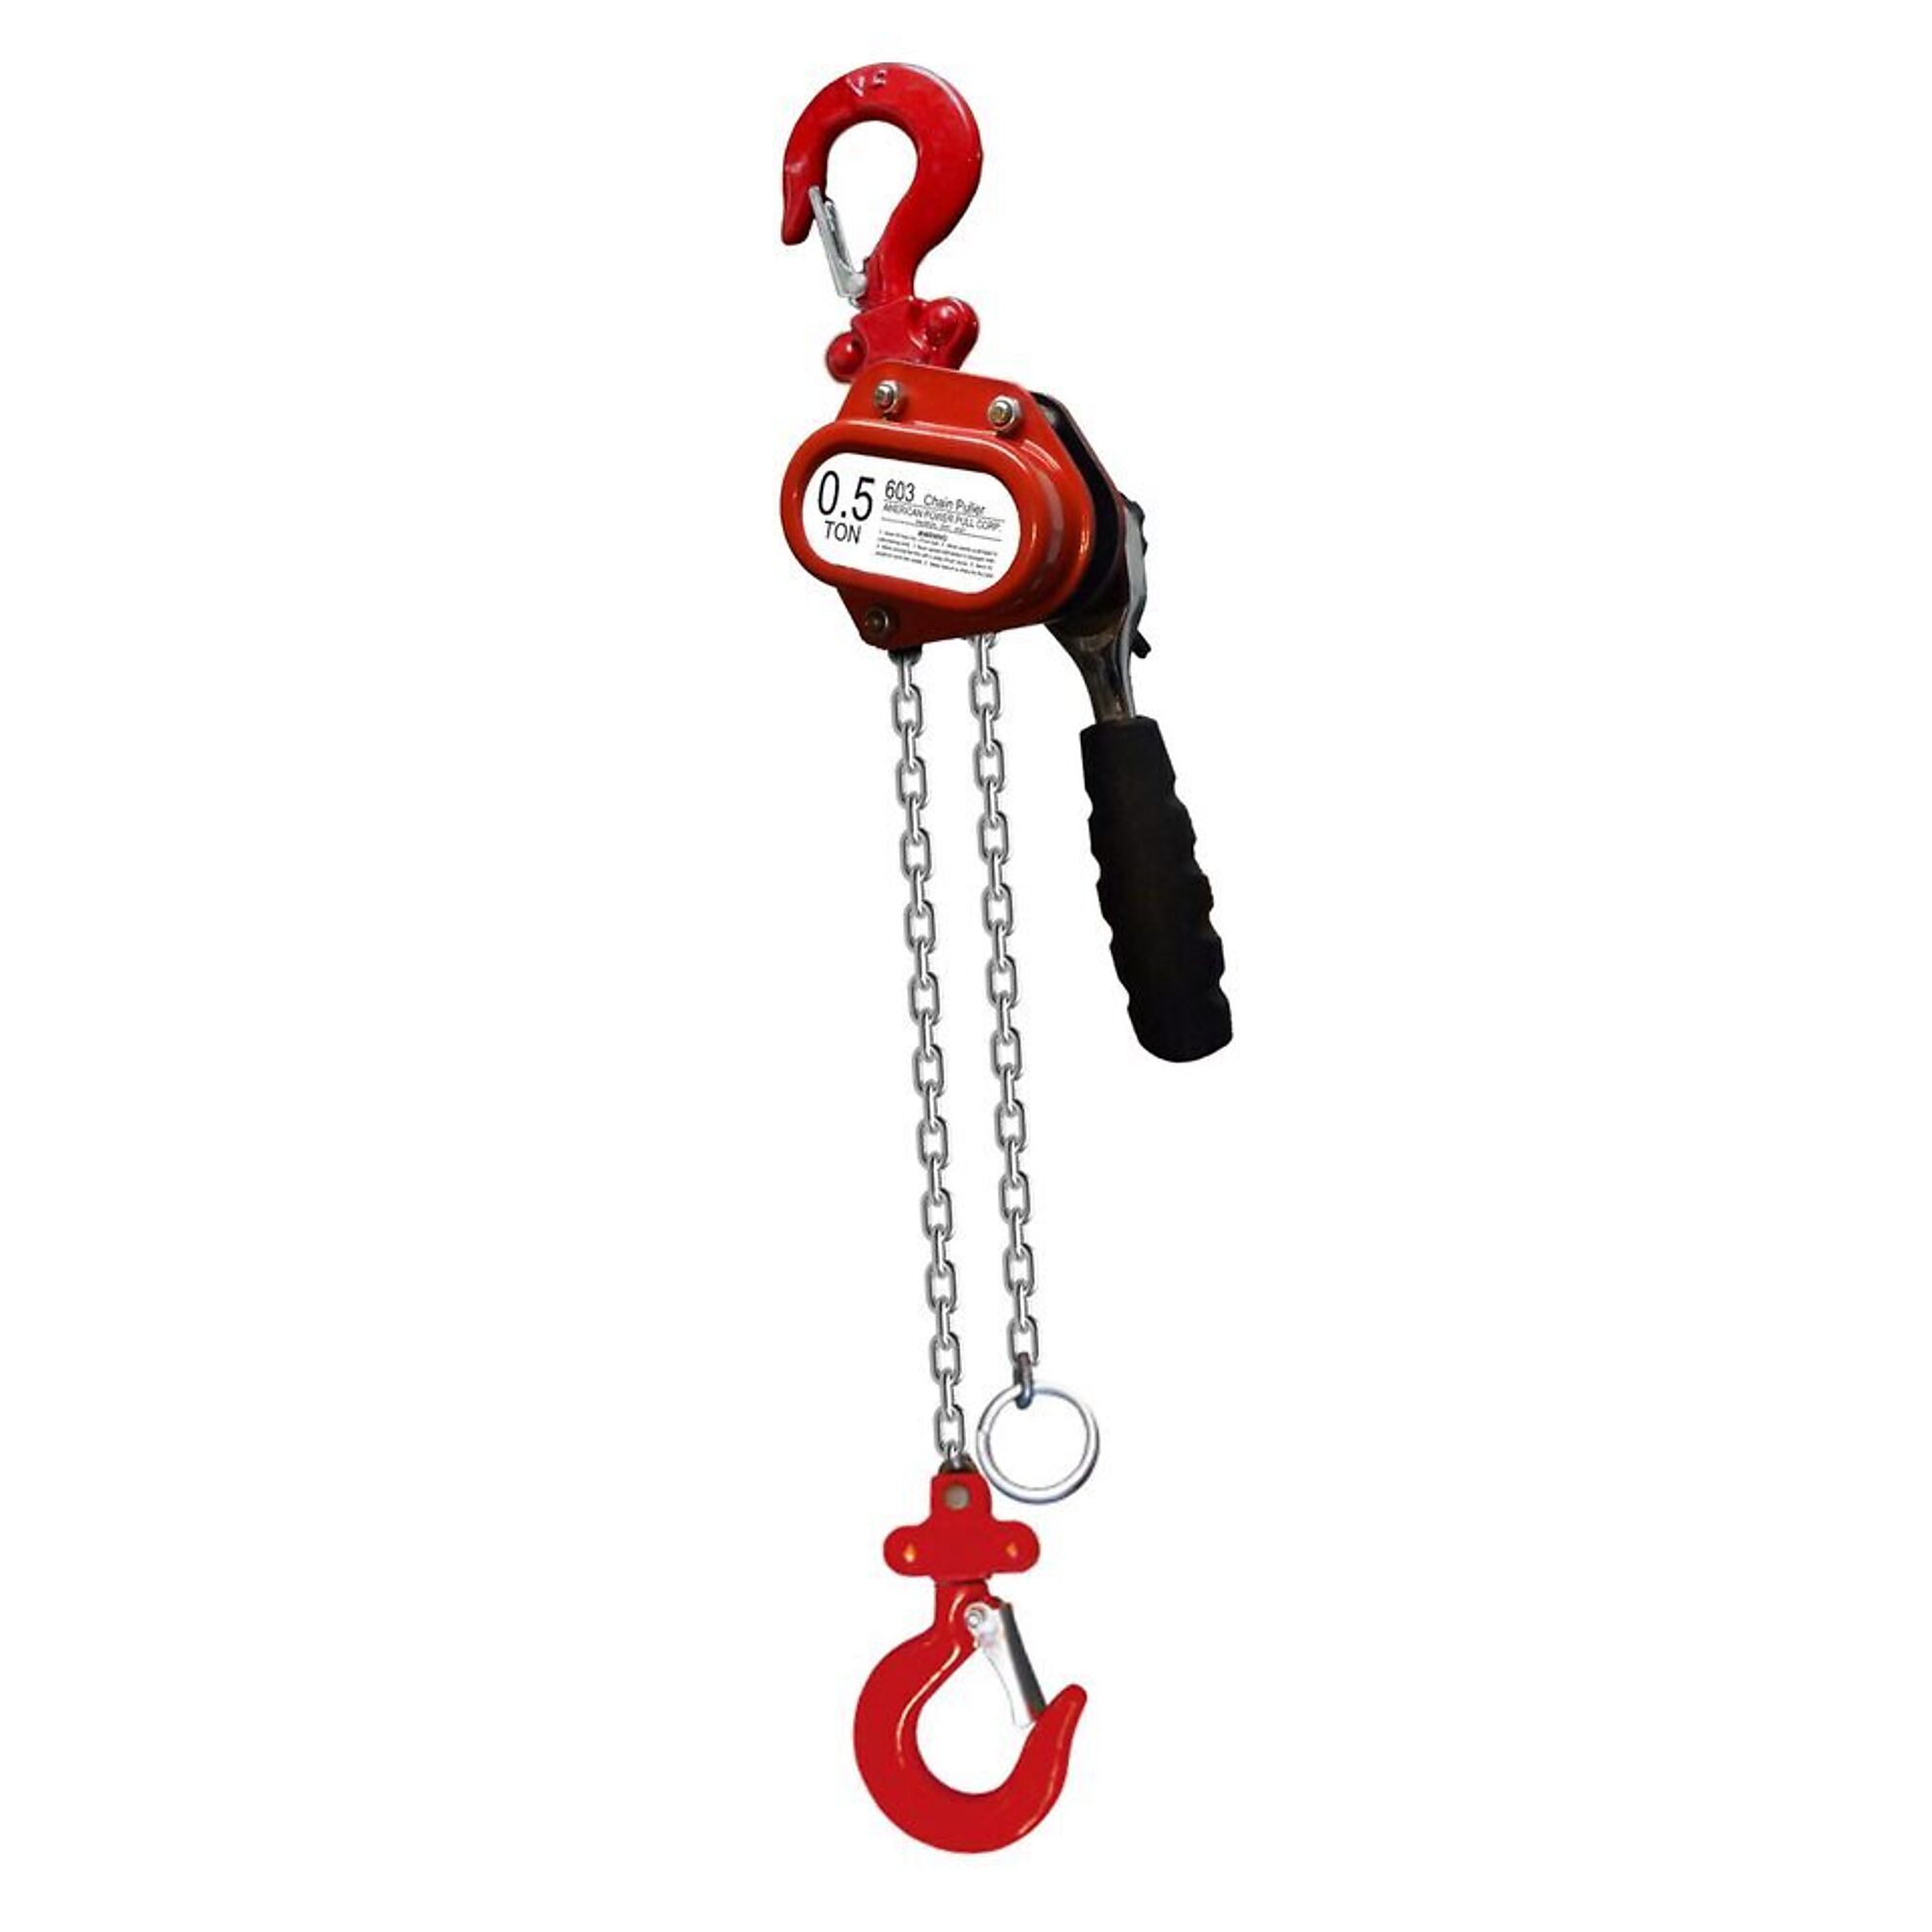 American Power Pull, .5 ton chain puller w/ 10ft. lift, Power Source Manual Lever, Capacity 1000 lb, Lift Height 10 ft, Model 603-10